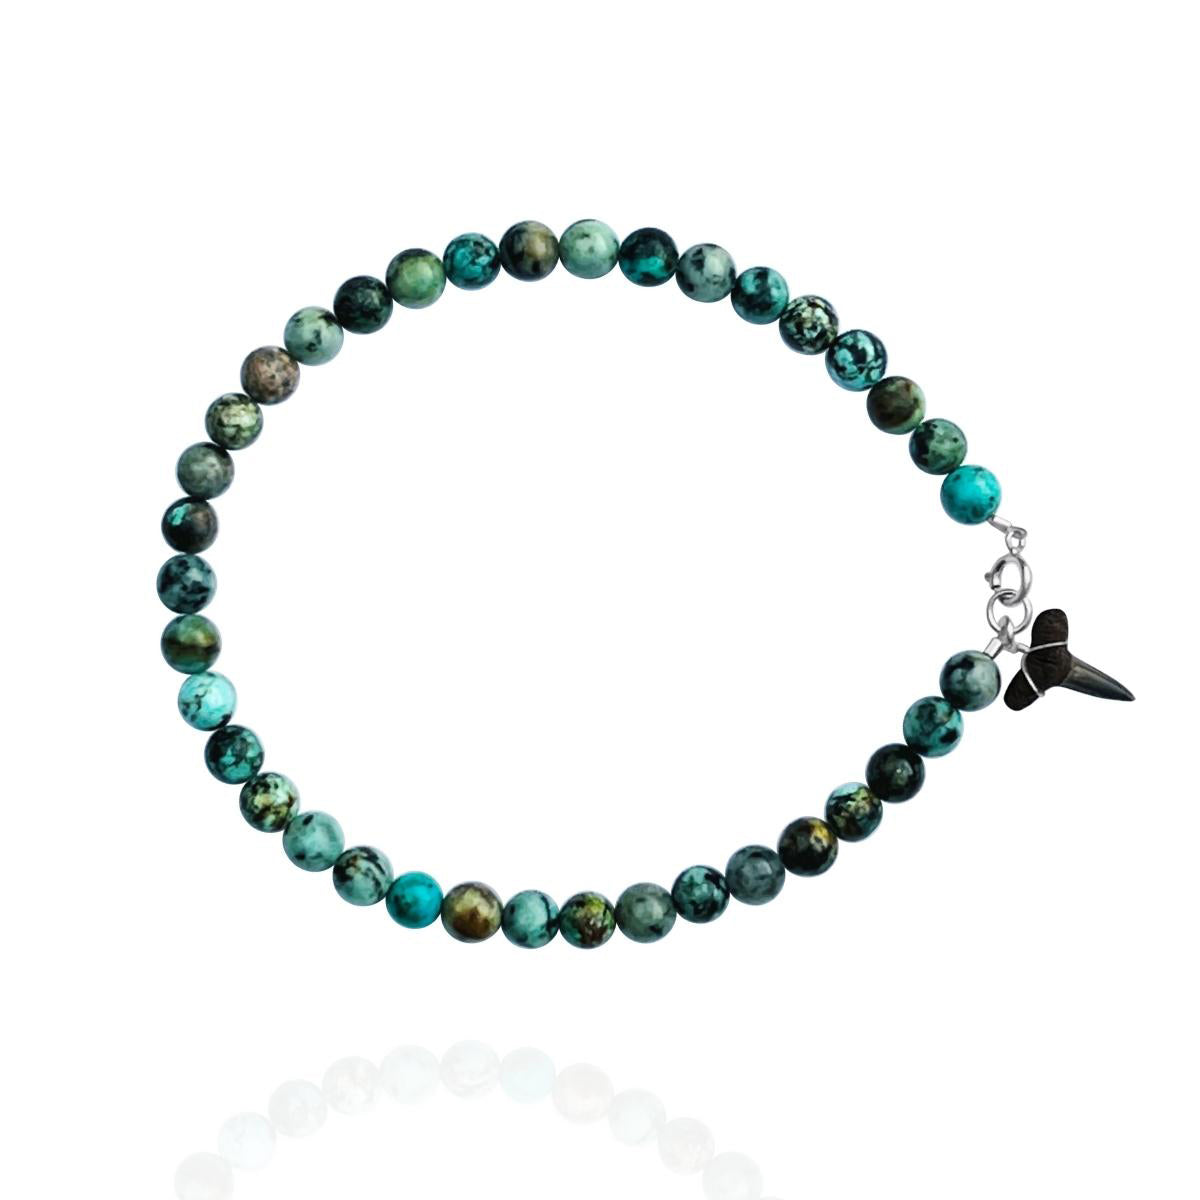 Adventurous Nature - Turquoise Anklet   Turquoise is believed to bring luck and to possess powers, including the ability to promote wealth, attract love and bring happiness.